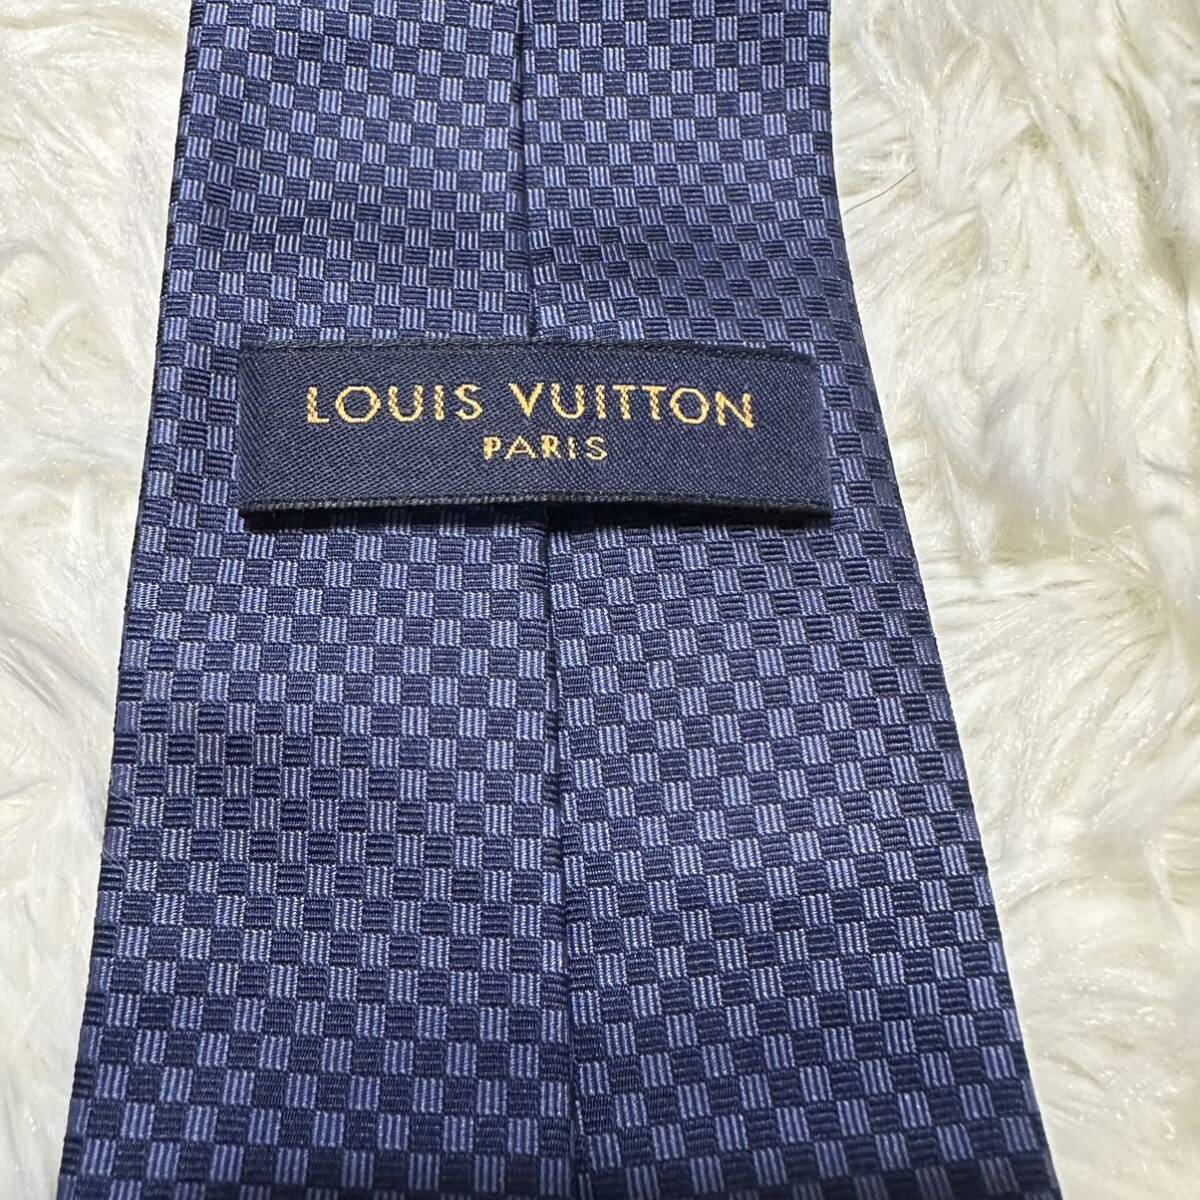 LOUIS VUITTON 新品未使用 ミニダミエ ロゴ ルイヴィトン ネクタイ 柄 メンズ 人気モデル 送料無料 カッコいい 総柄 人気デザイン 高級の画像7